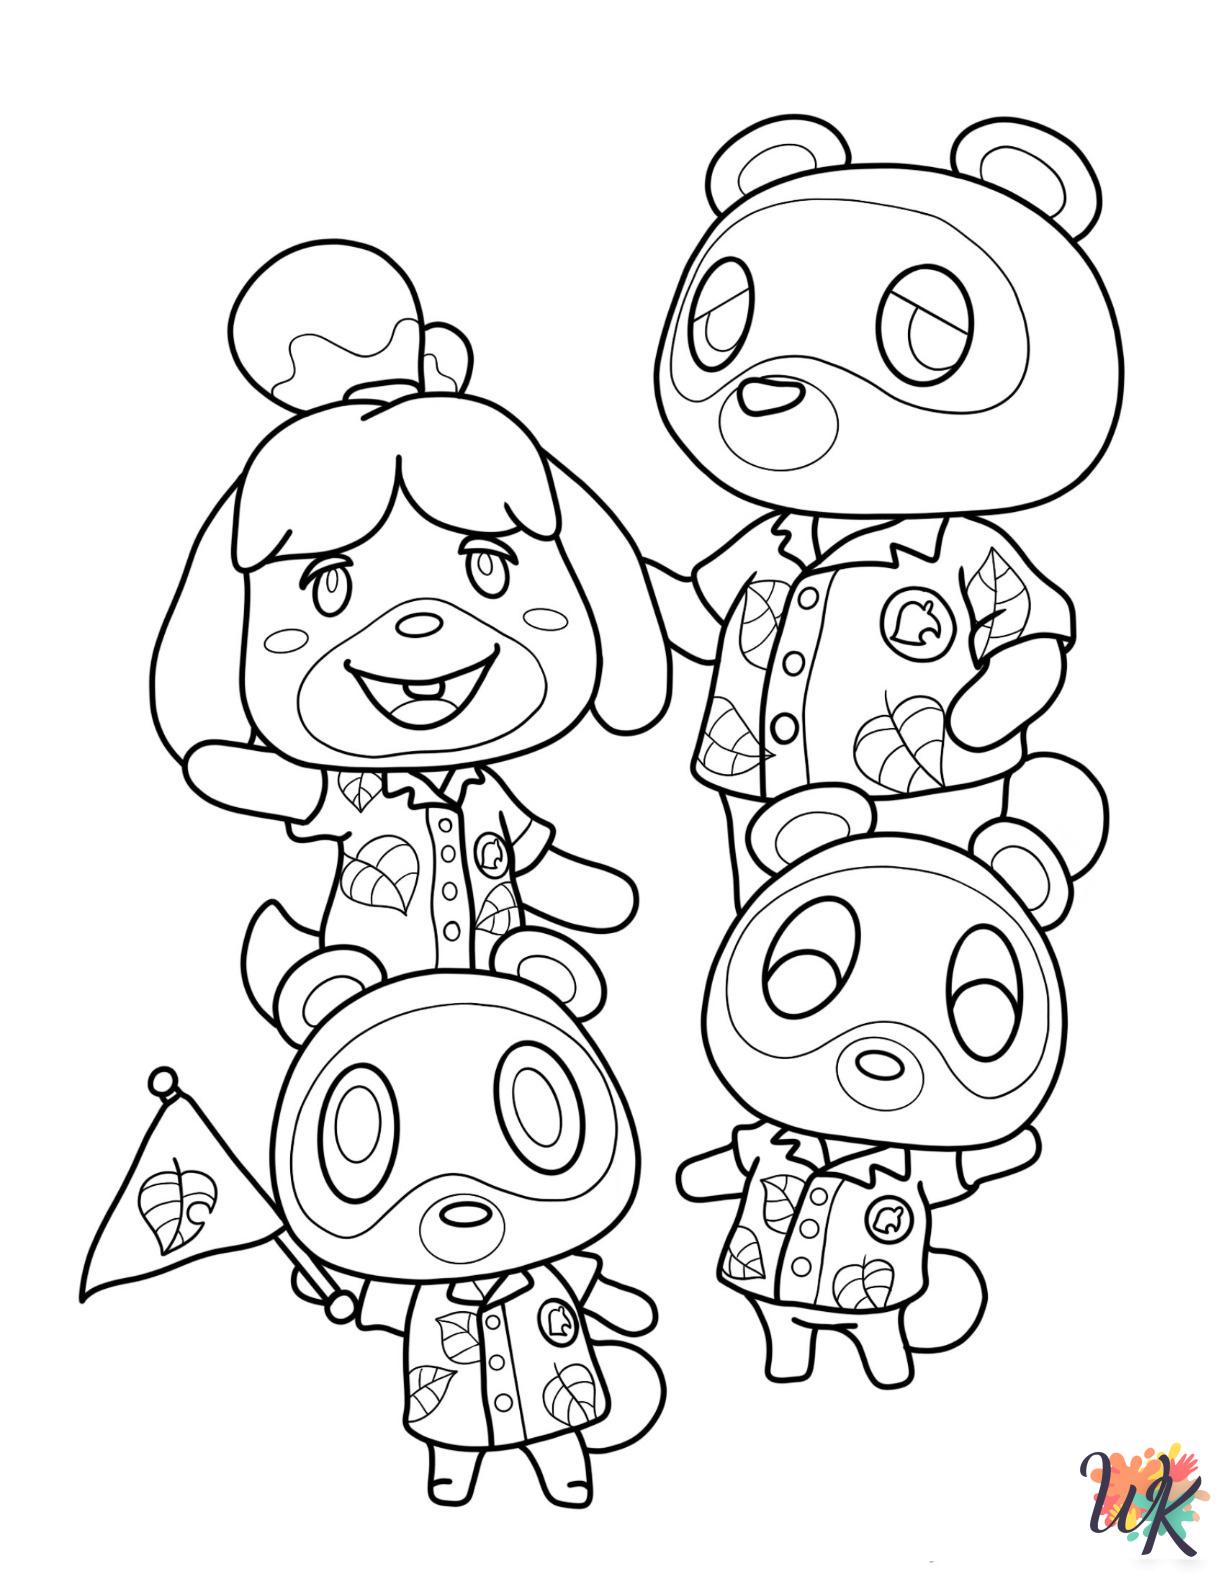 Animal Crossing coloring pages for adults 1